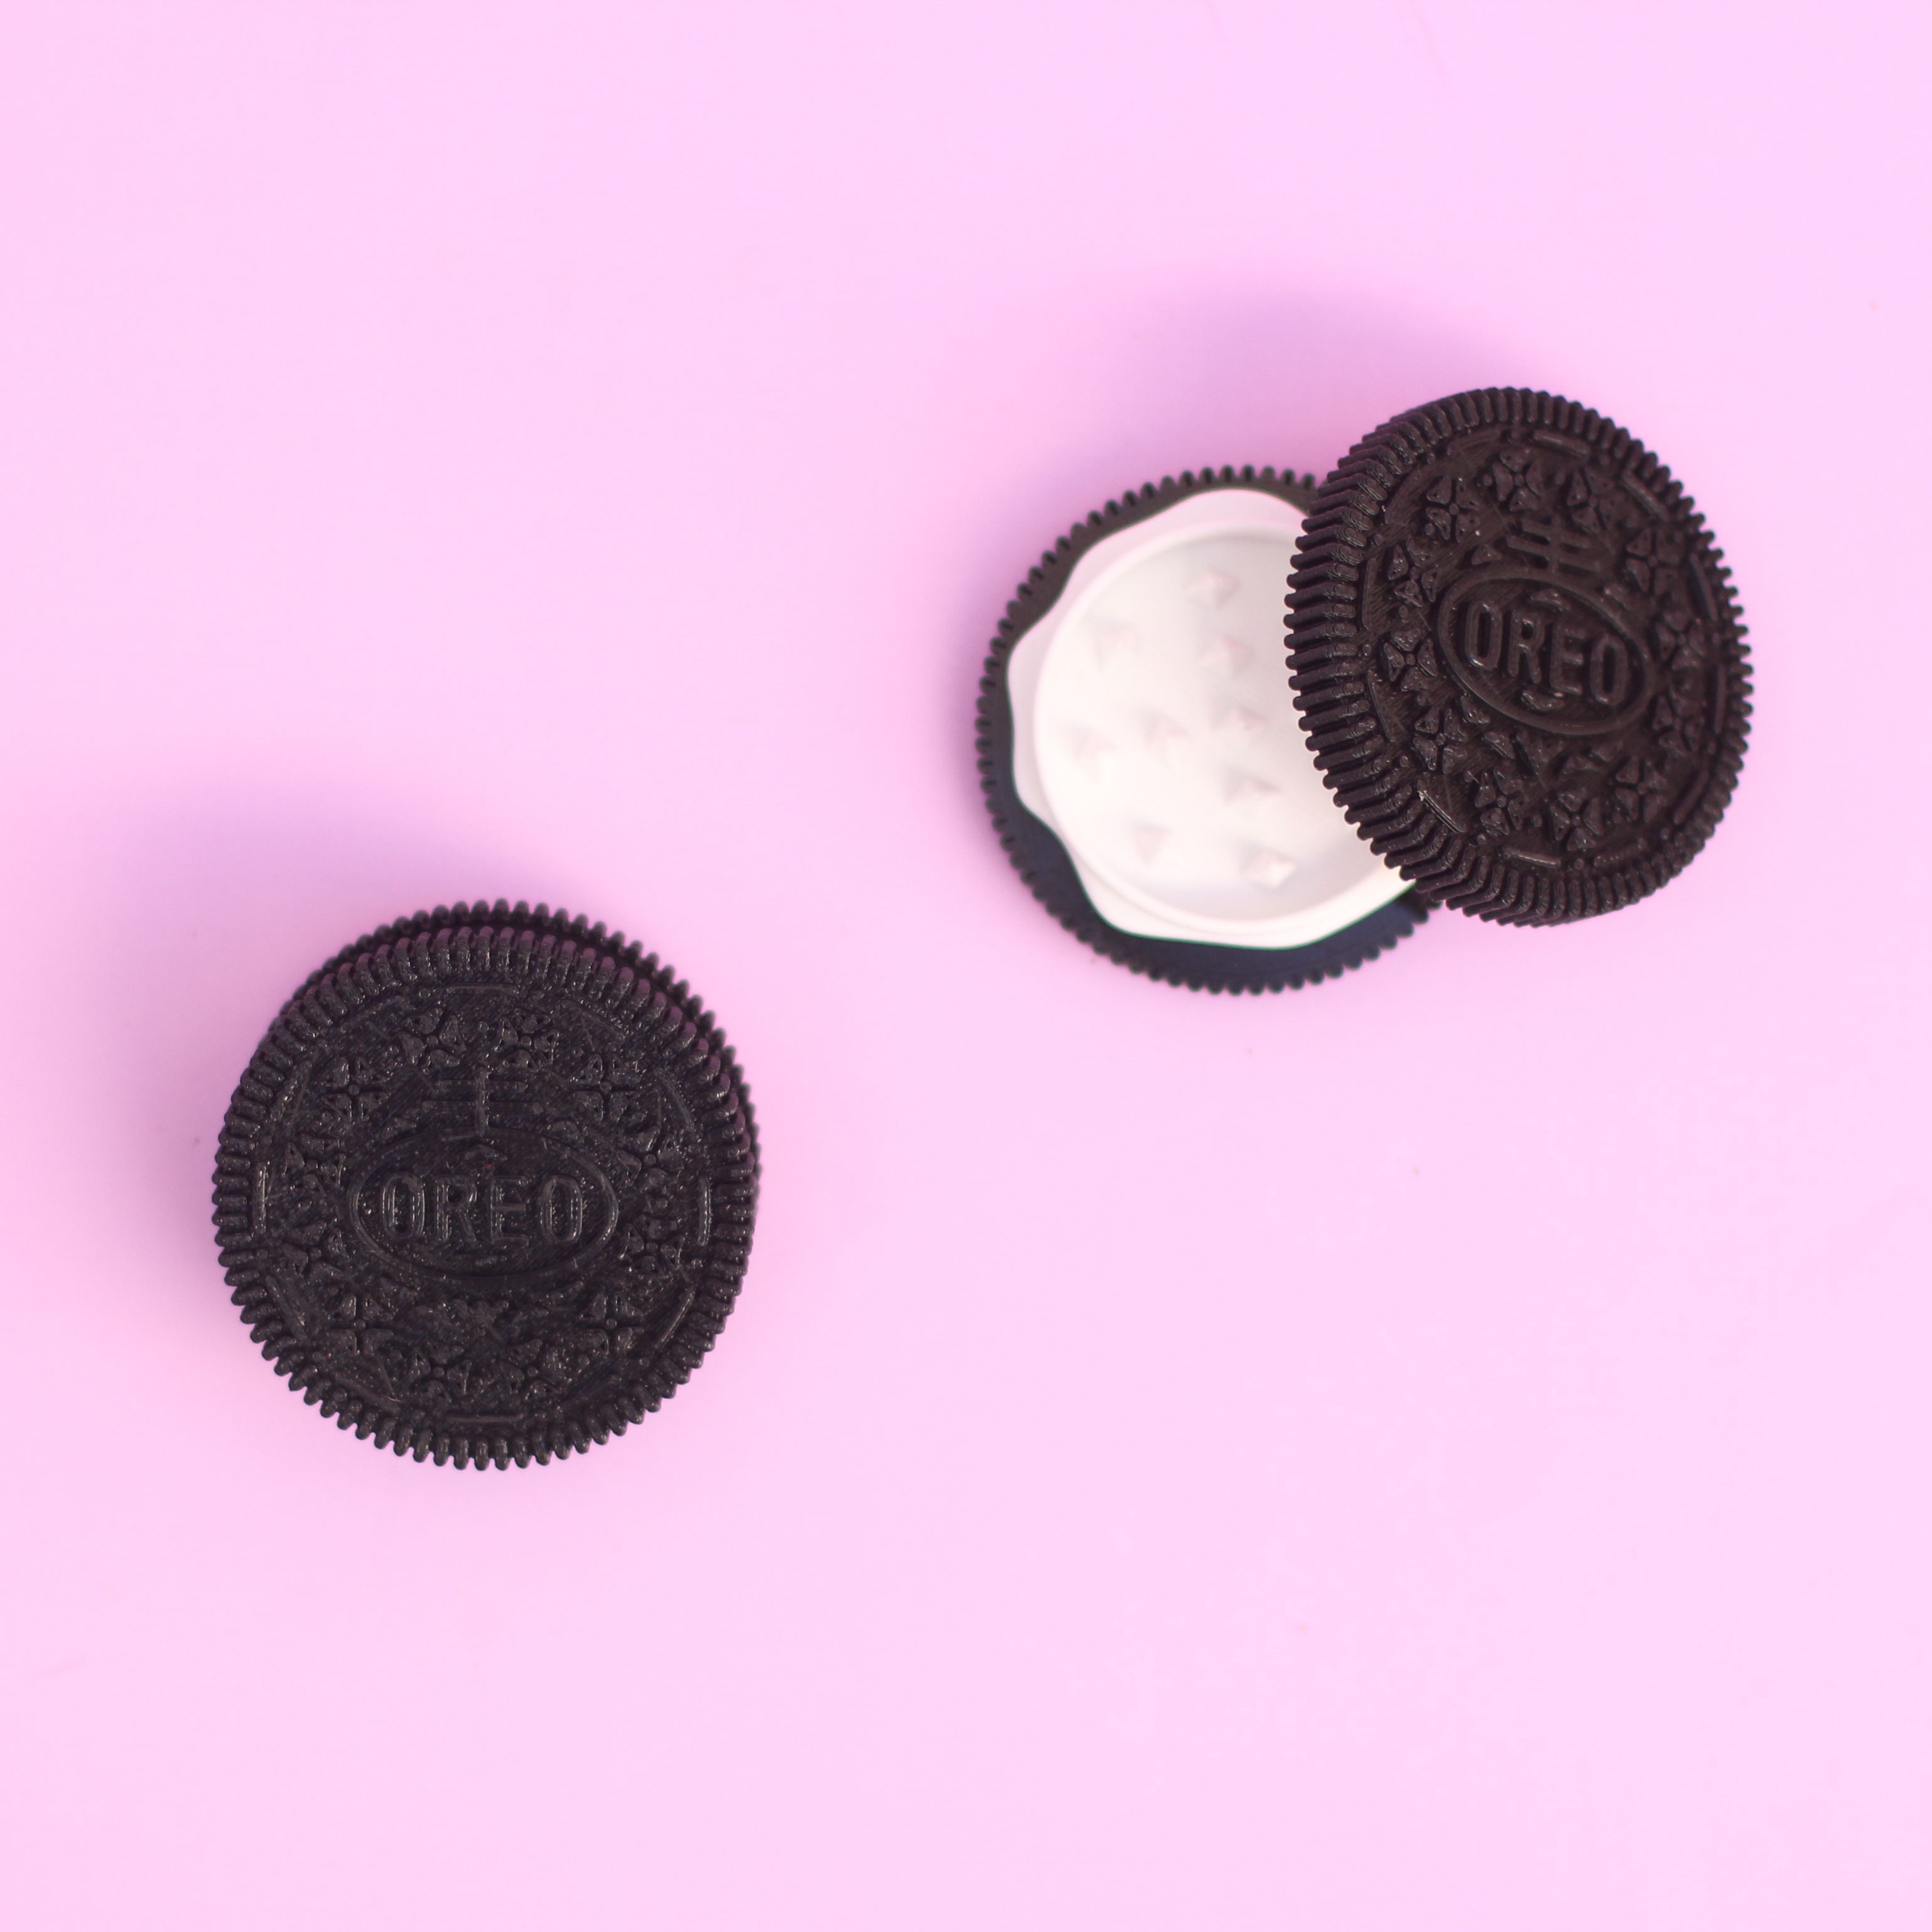 Two oreo cookies on a pink background. - Oreo